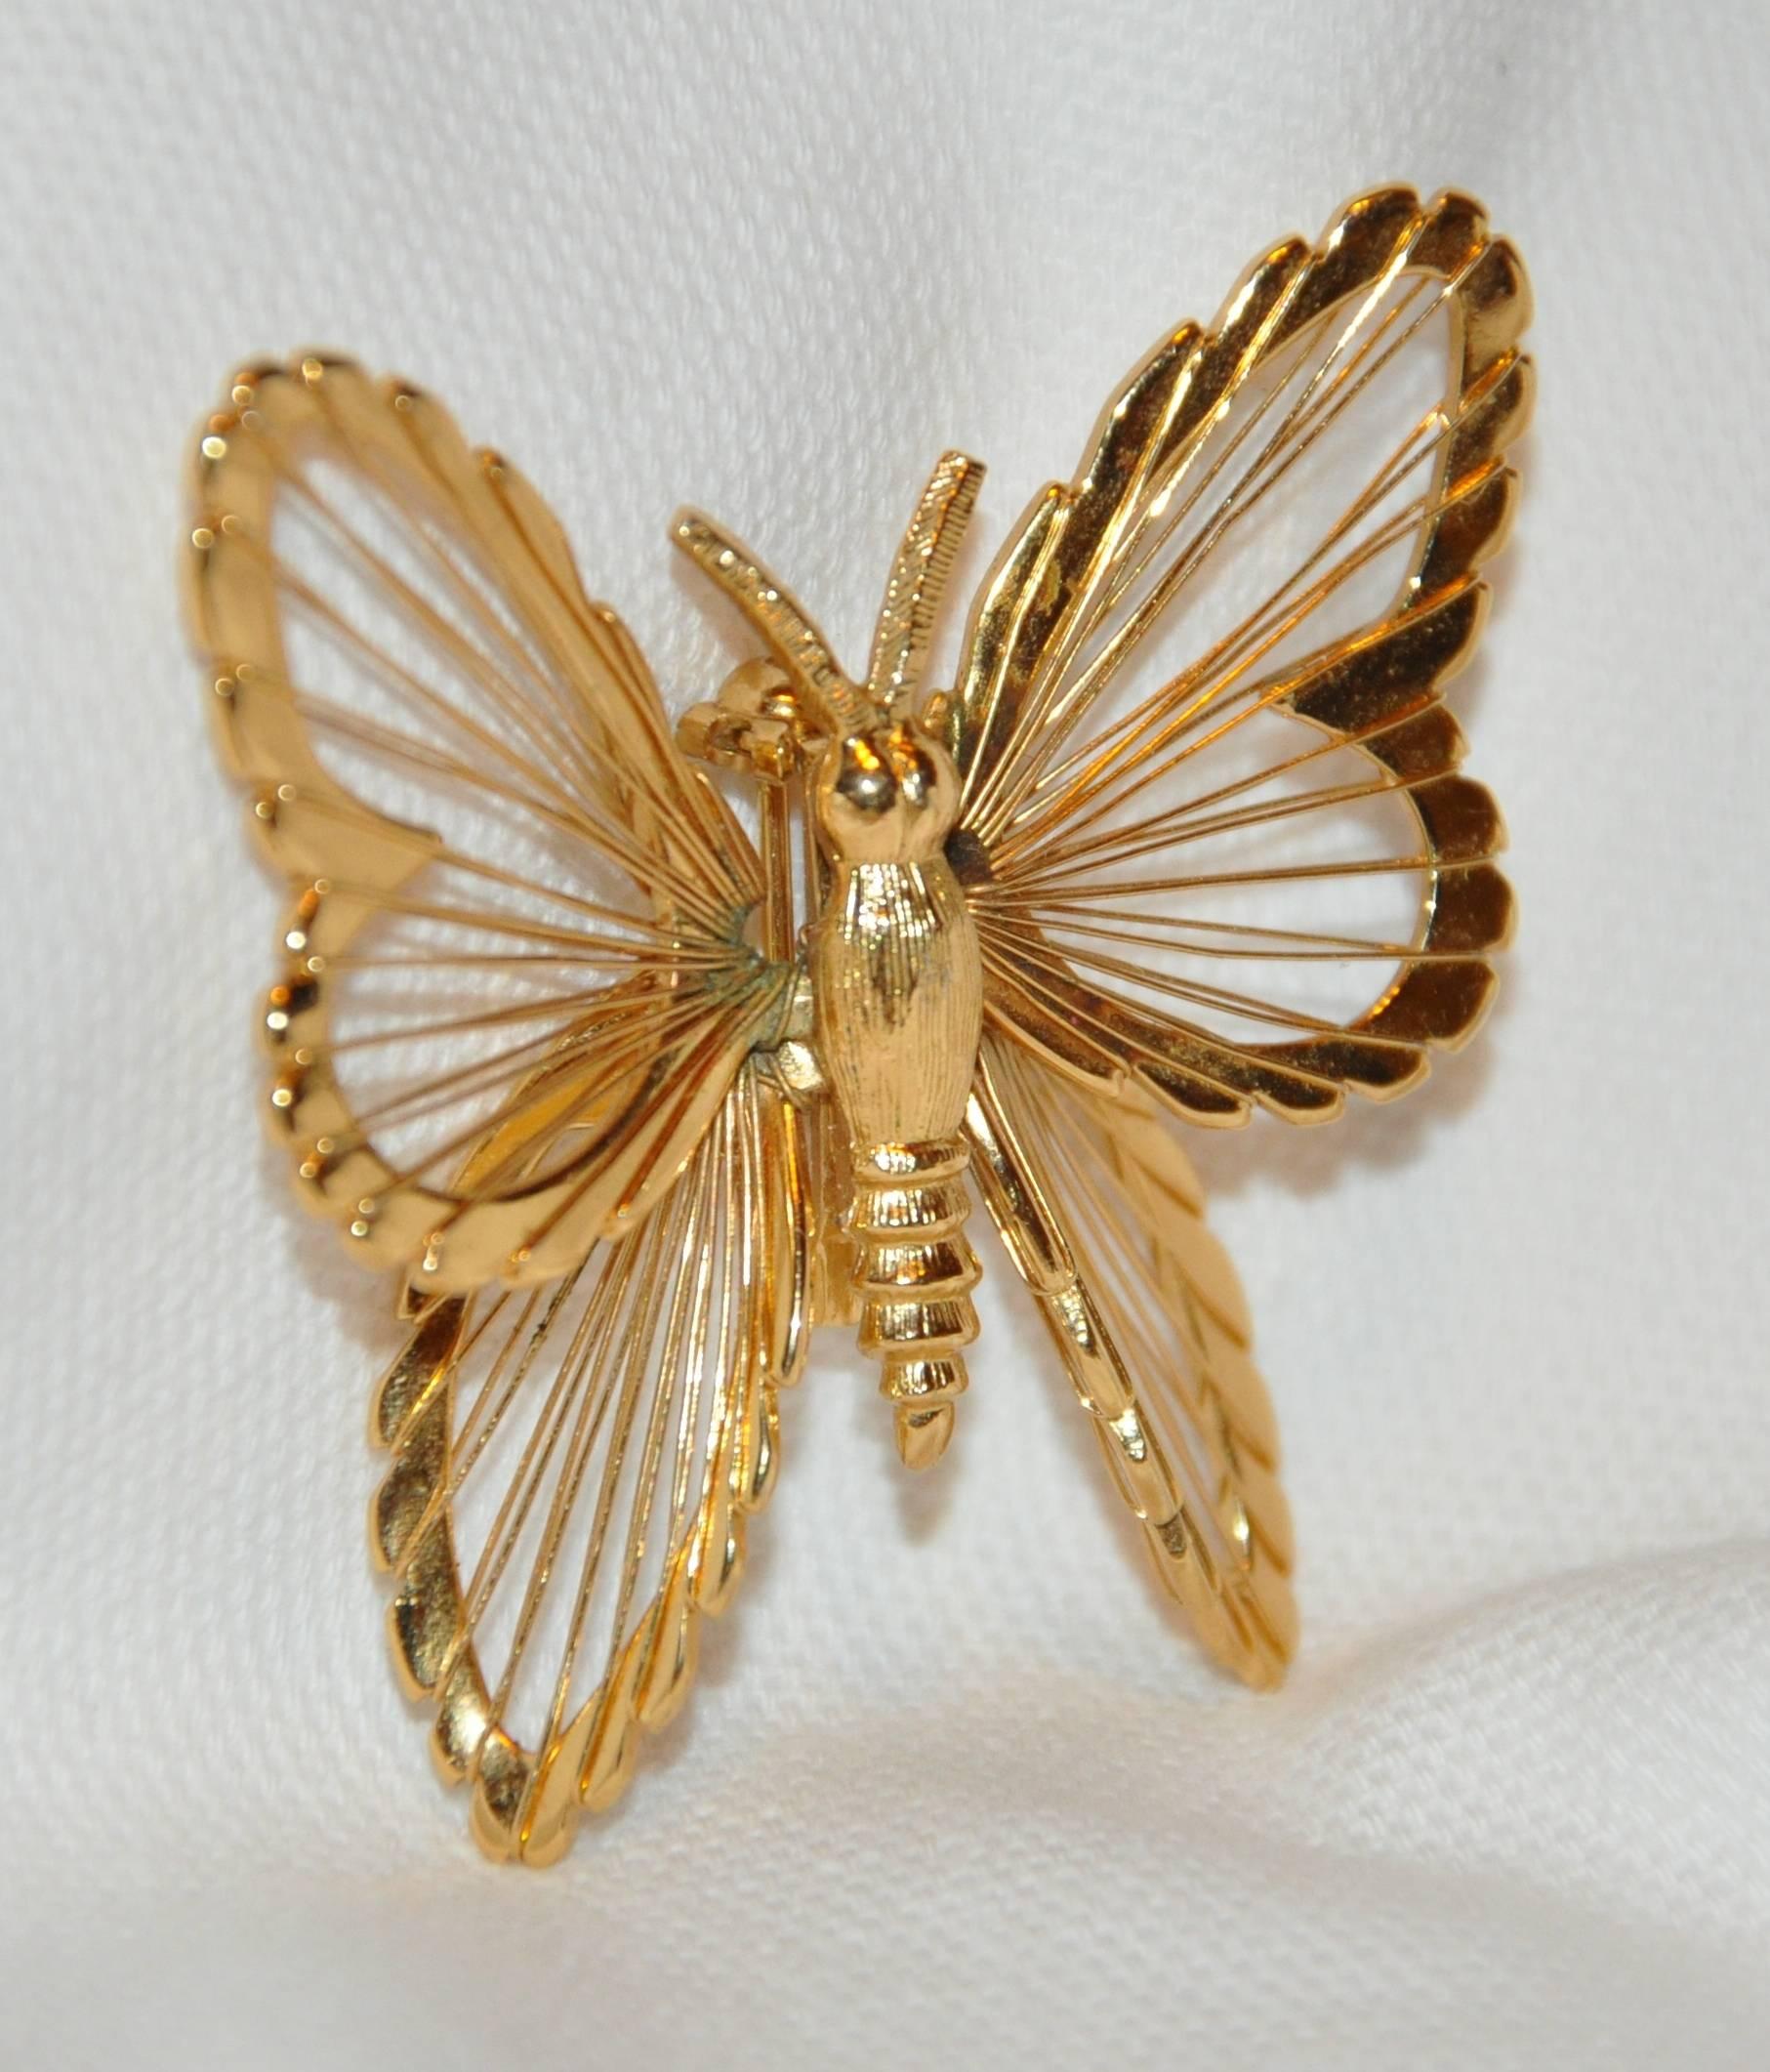        Monet wonderfully detailed gilded gold vermeil hardware "Butterfly" brooch measures 1 6/8 inches, width is 1 6/8 inches, depth is 1/2 inch, made in US.